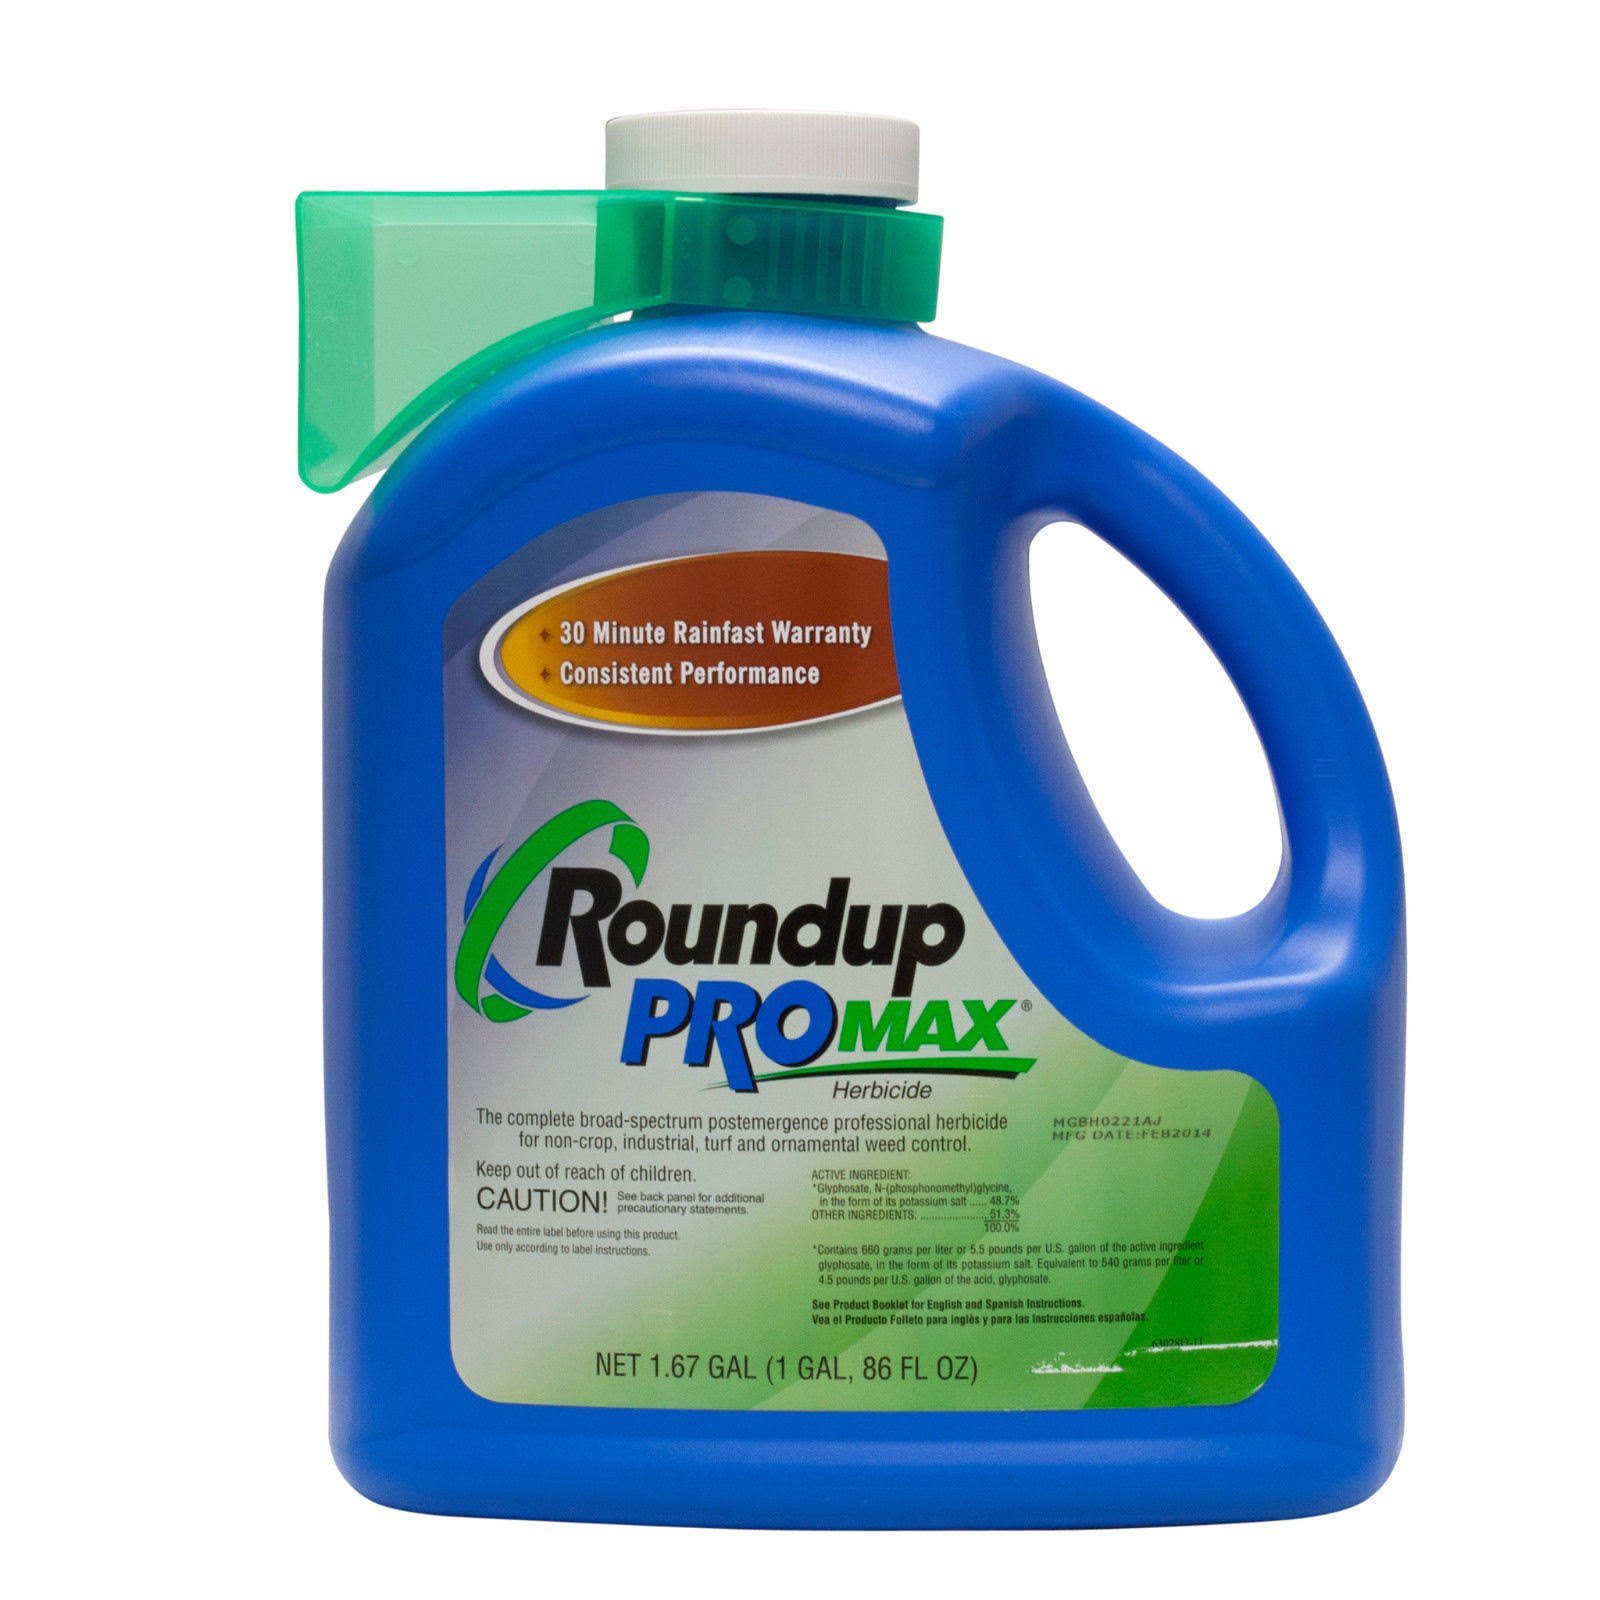 Roundup Promax - 1.67 Gallons